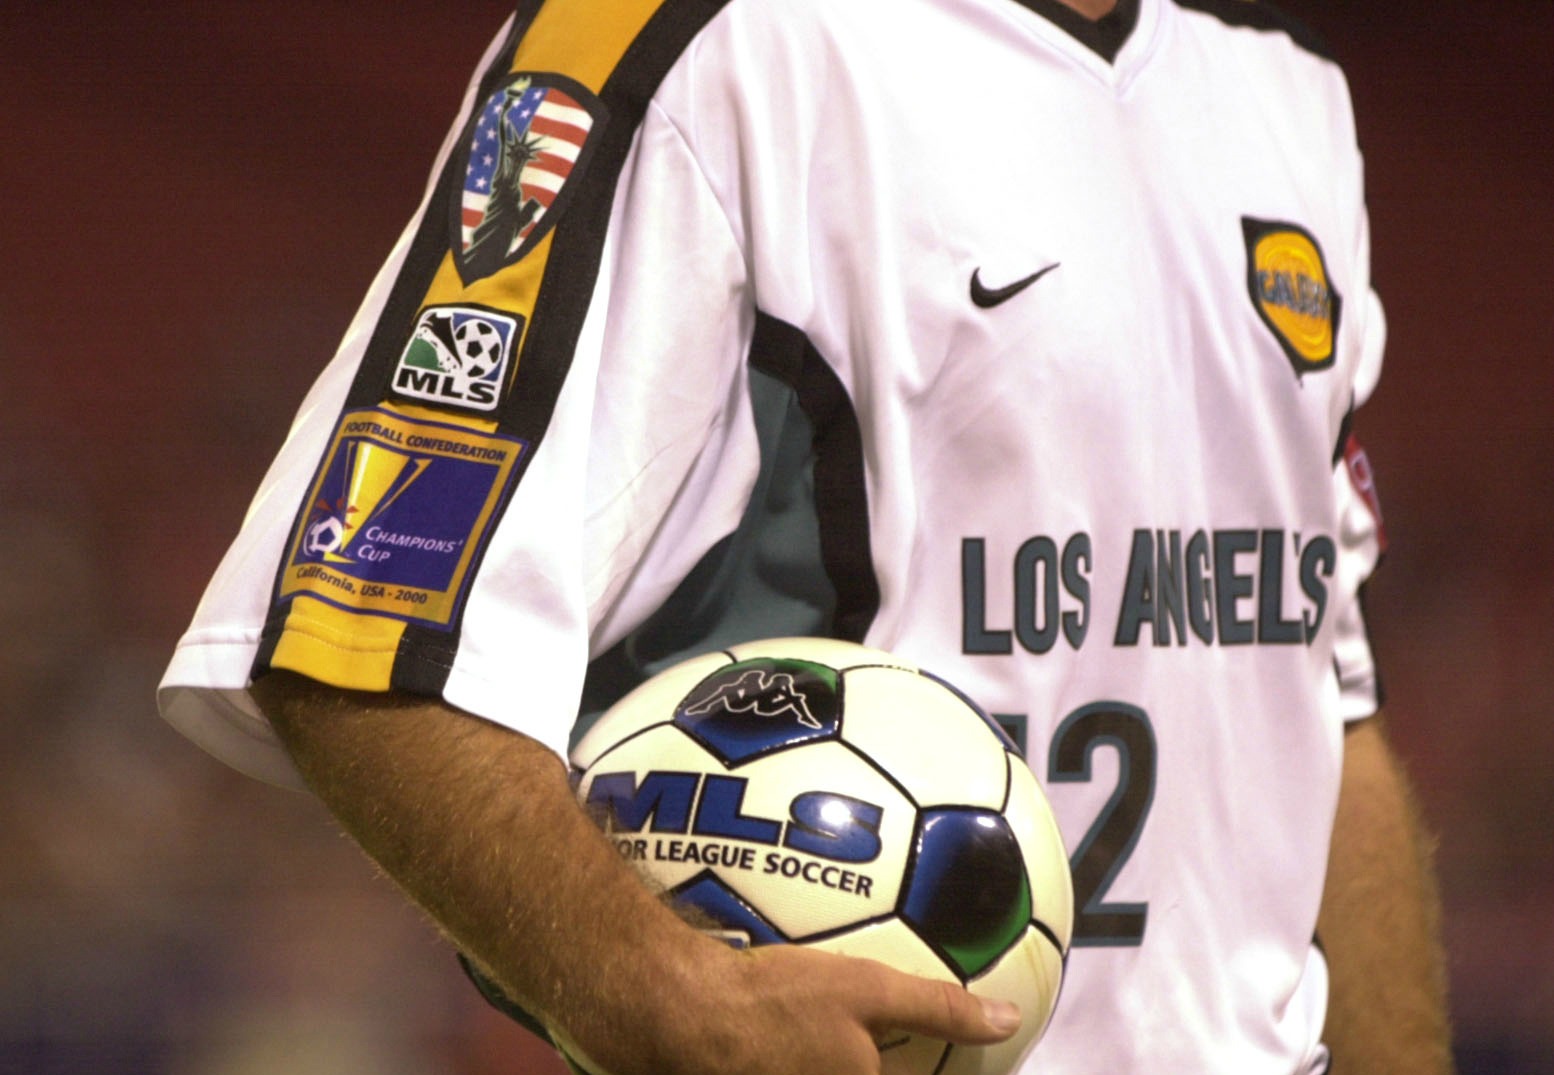 Simon Elliott of the L.A. Galaxy and the rest of the players wore a patch of the Statue of Liberty on their right shoulder to honor the victims of the World Trade Center disaster during their game against the New York/New Jersey MetroStars at Giants Stadium in East Rutherford, New Jersey, on Sept. 26, 2001. (Photo by Ezra Shaw/ALLSPORT)